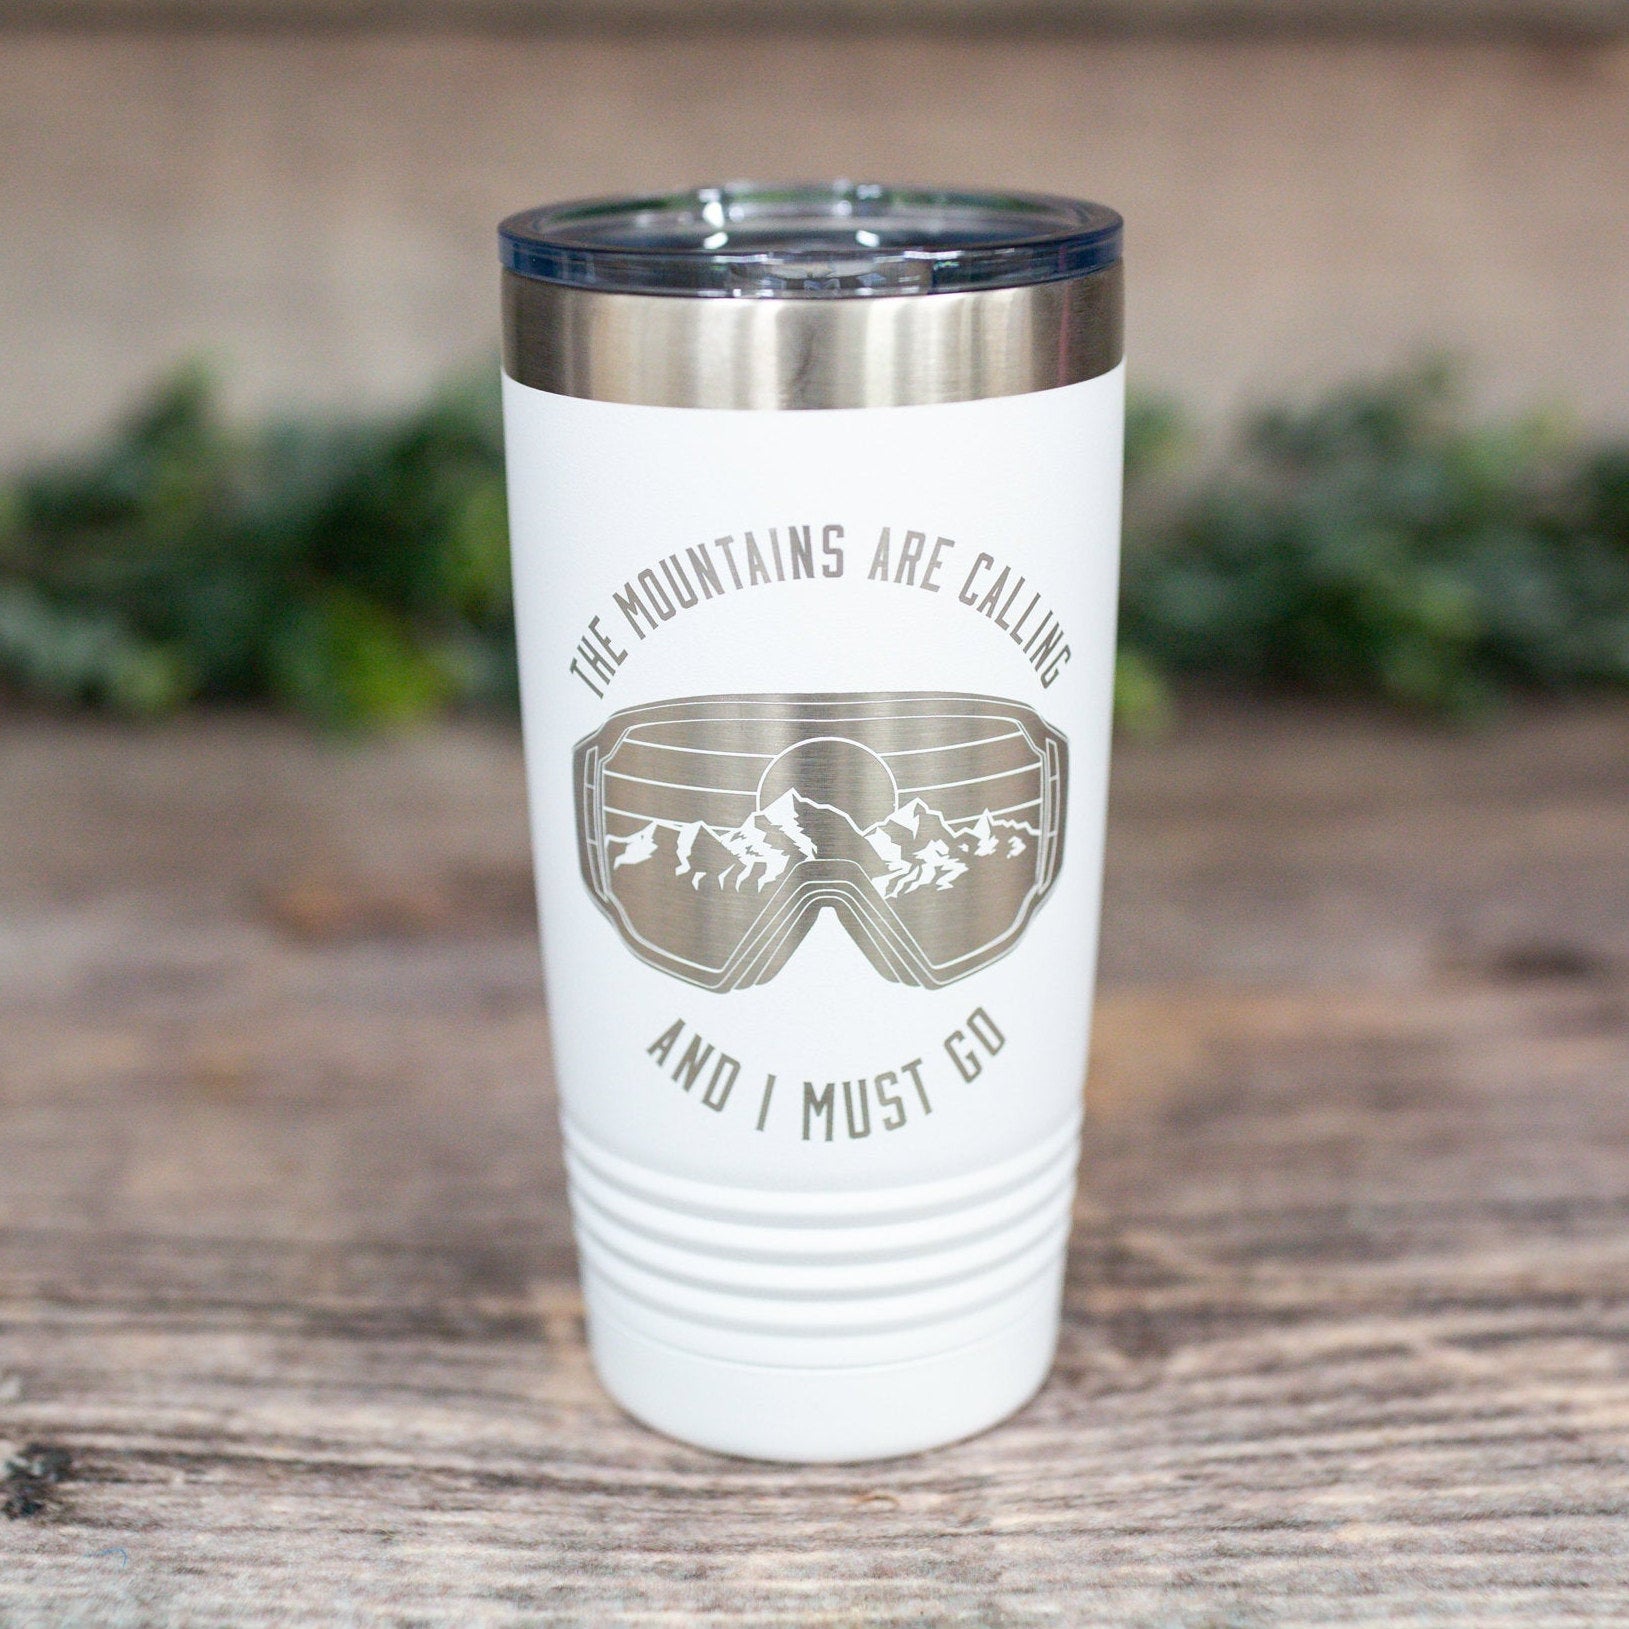 https://3cetching.com/wp-content/uploads/2021/07/the-mountains-are-calling-and-i-must-go-engraved-stainless-winter-sports-tumbler-ski-mug-gift-for-skiers-60f739a7.jpg